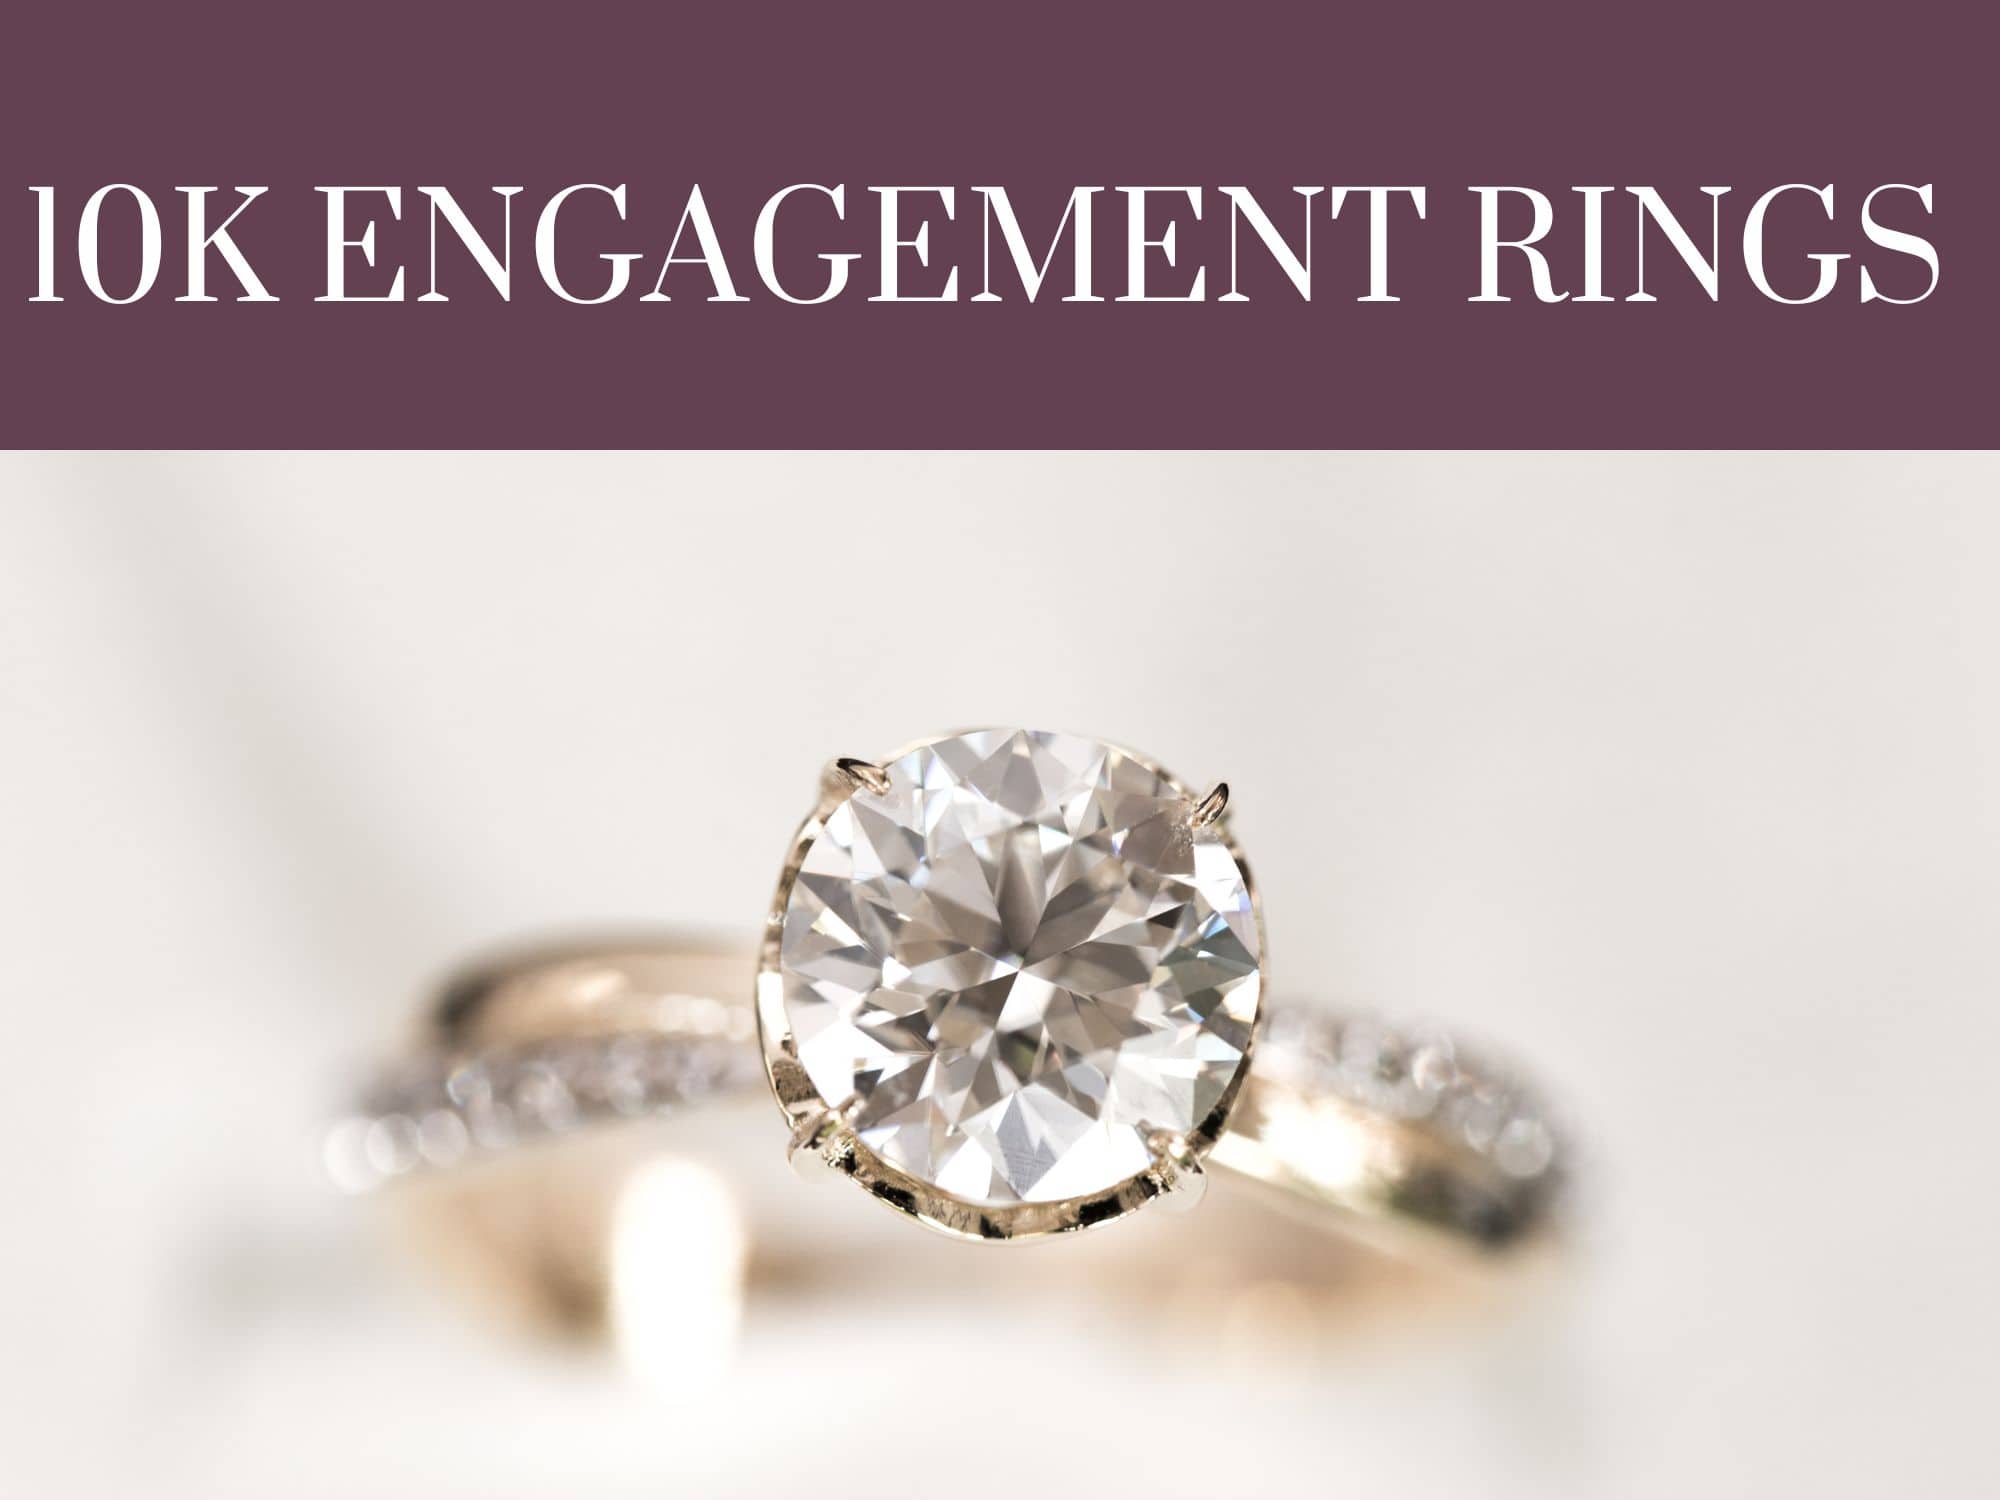 10k engagement rings from Teach Jewelry